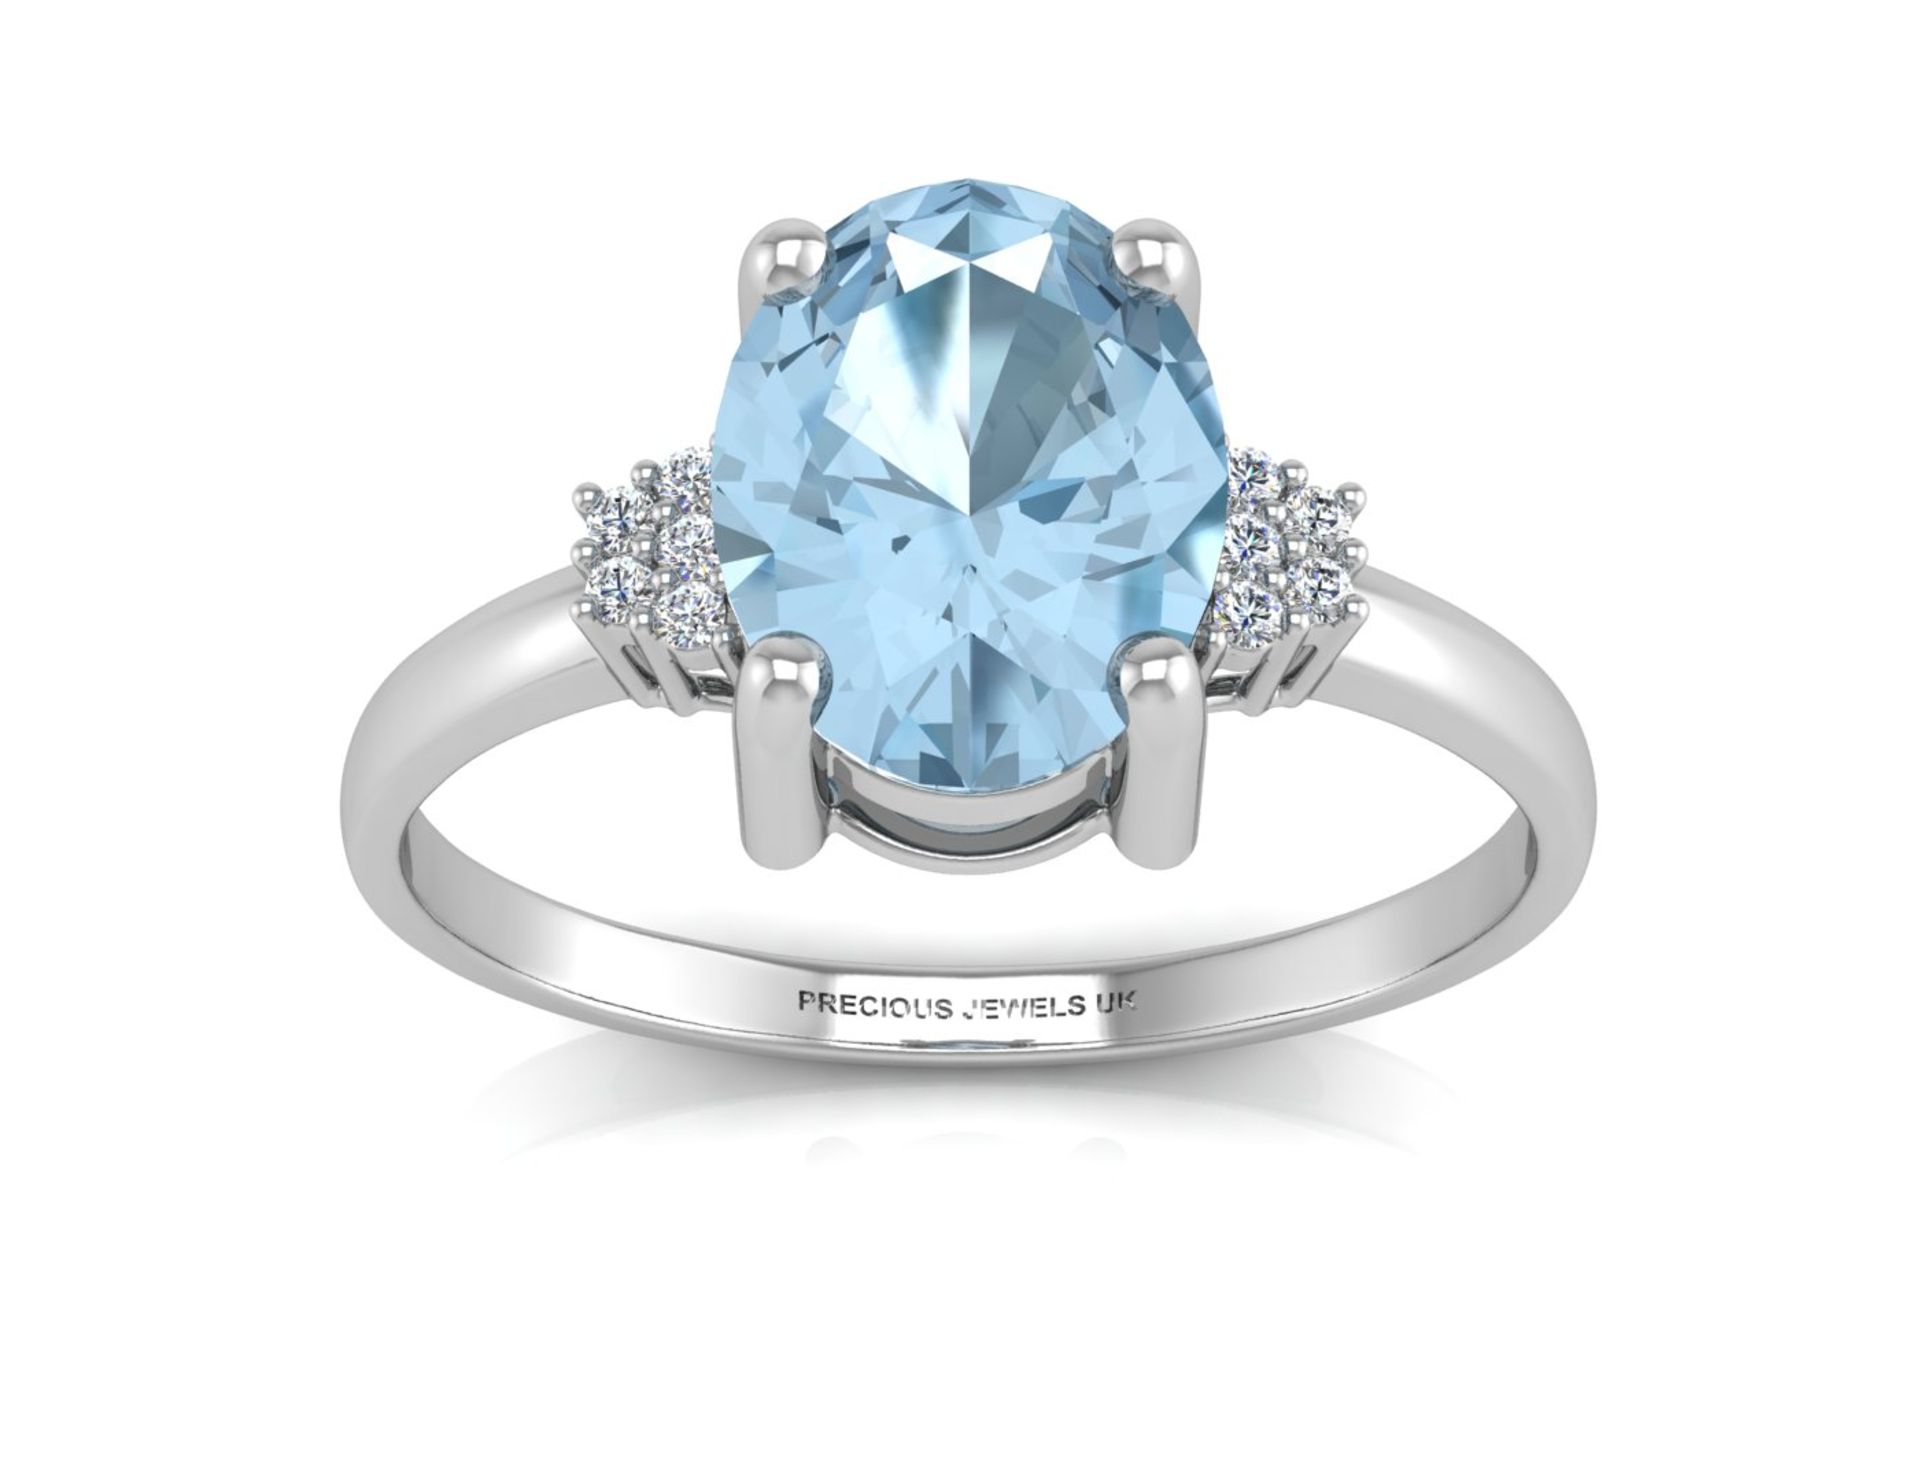 9ct White Gold Diamond And Blue Topaz Ring (BT1.89) 0.03 Carats - Valued By GIE £1,210.00 - An - Image 3 of 5